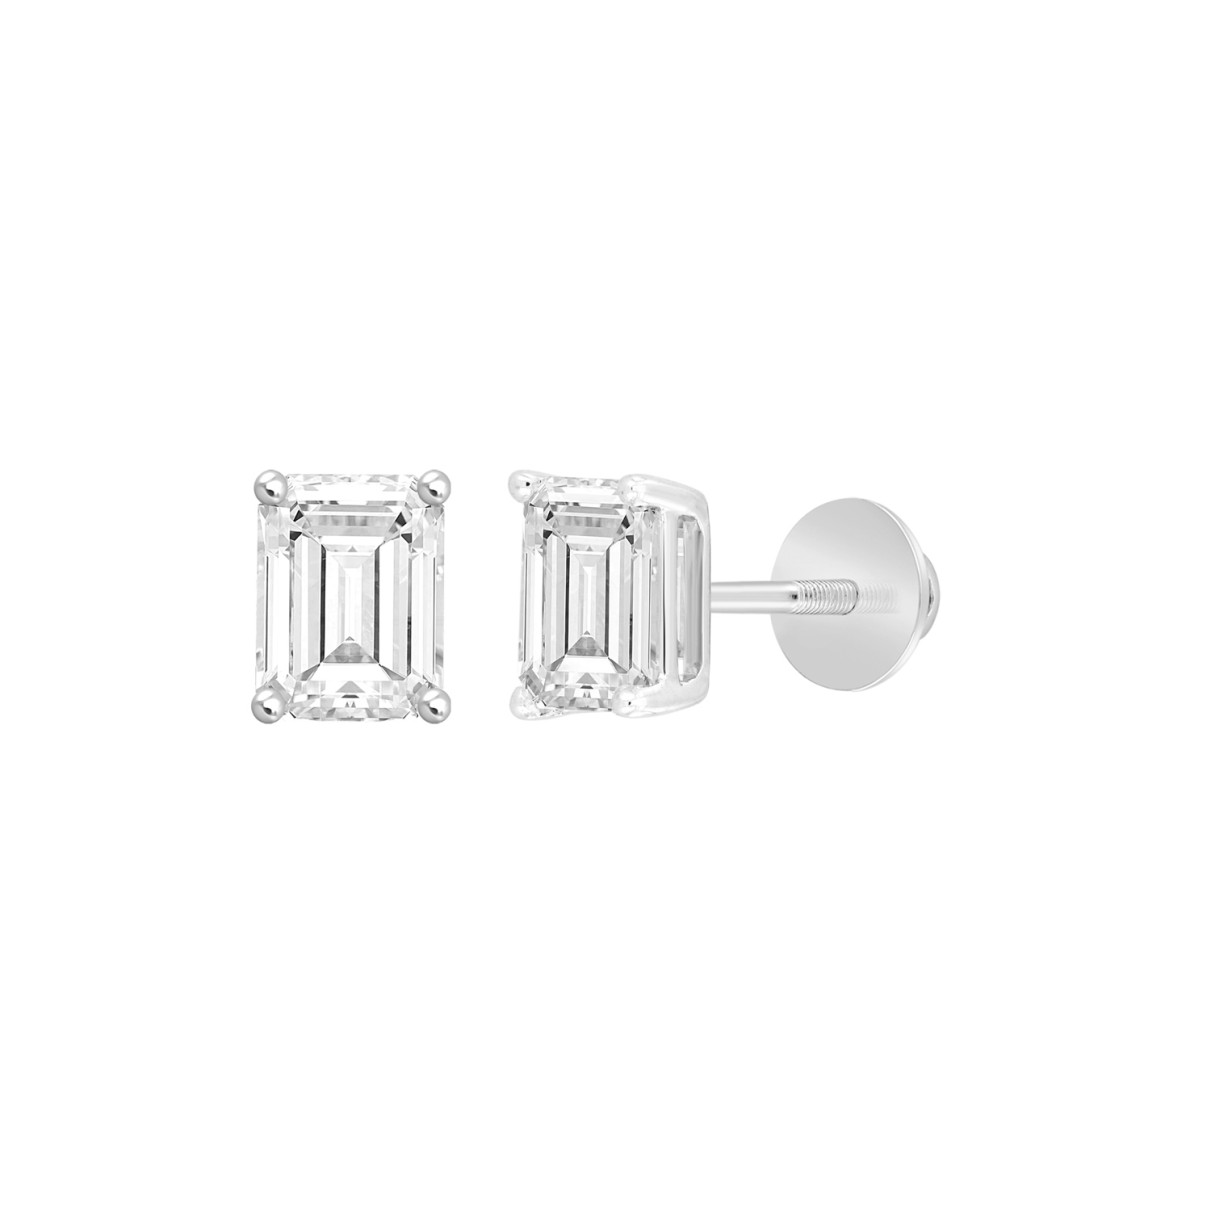 14K WHITE GOLD 2CT EMERALD DIAMOND LADIES SOLITAIRE EARRINGS 